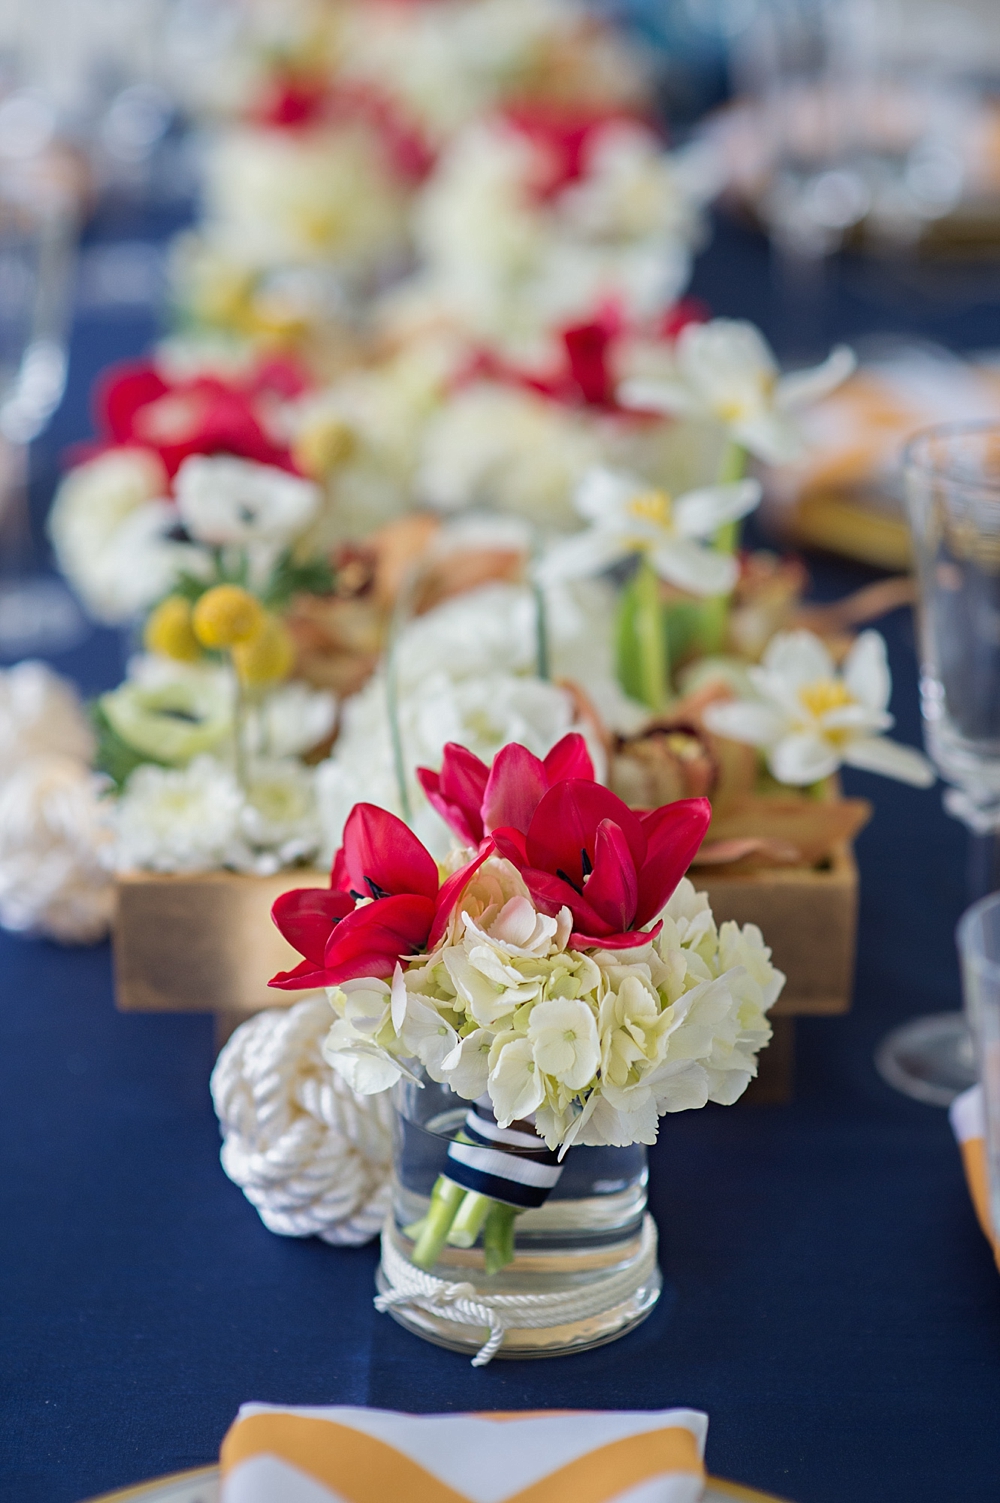 Nautical & Preppy tablescape in navy blue, white, red and yellow